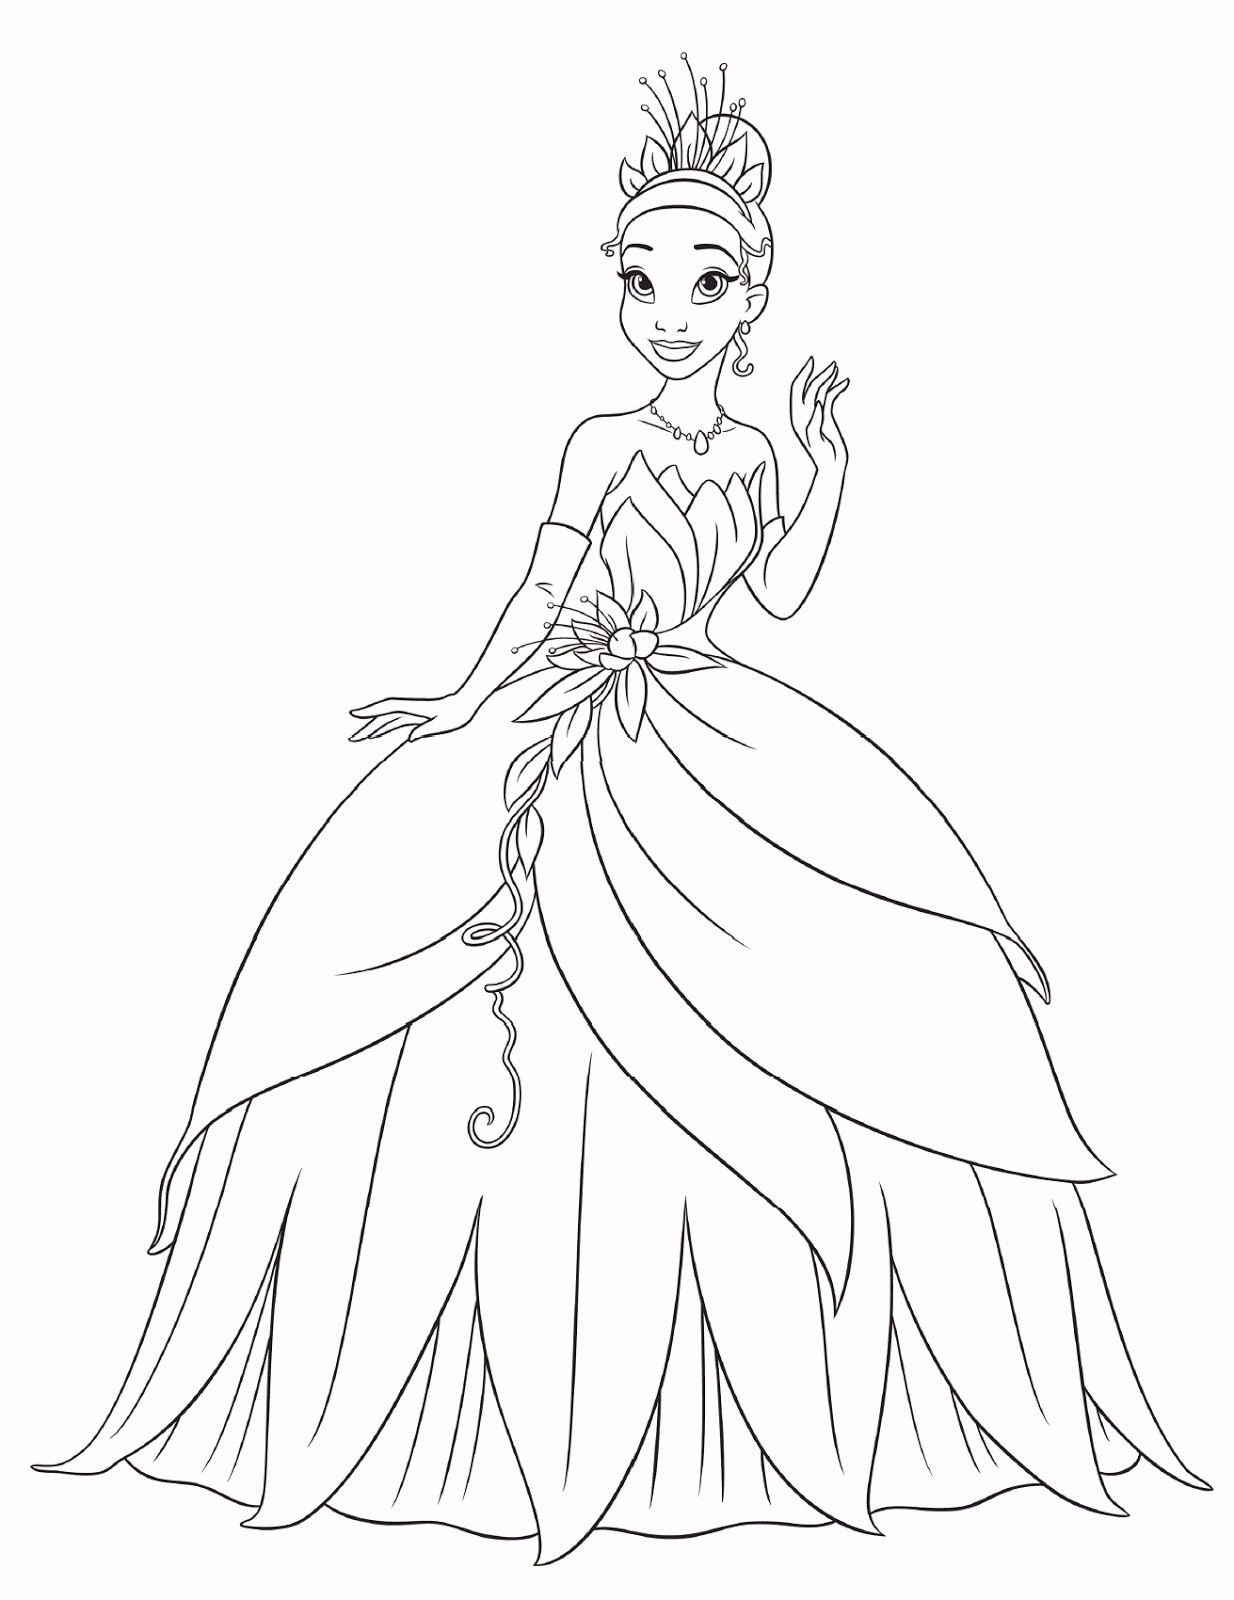 Princess Tiana Coloring Pages For Kids